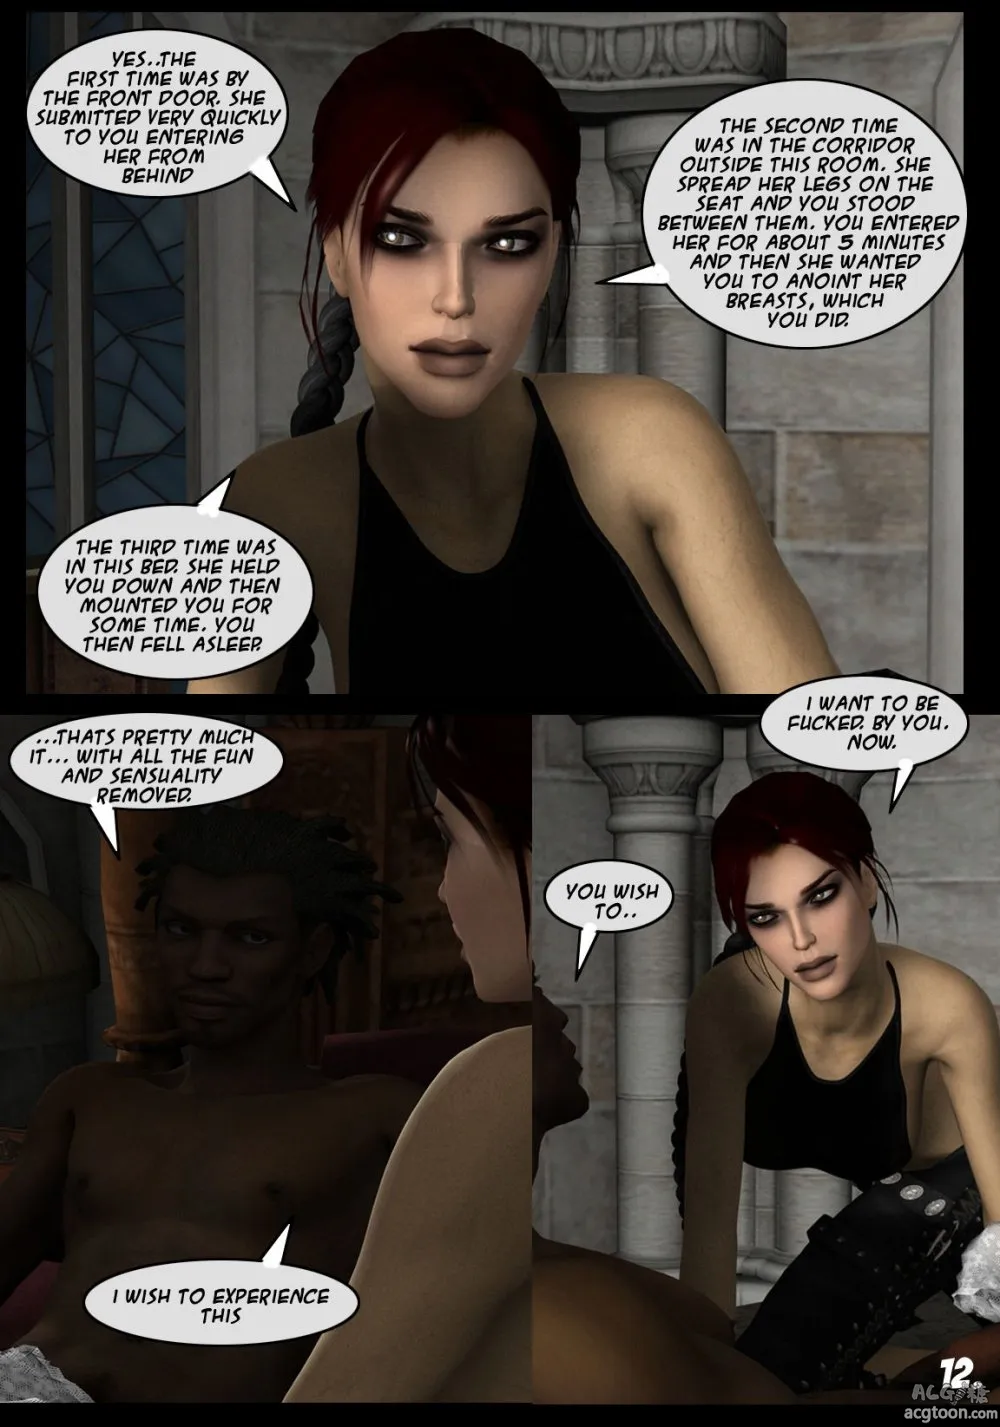 Lara Croft and Doppelganger - Page 12